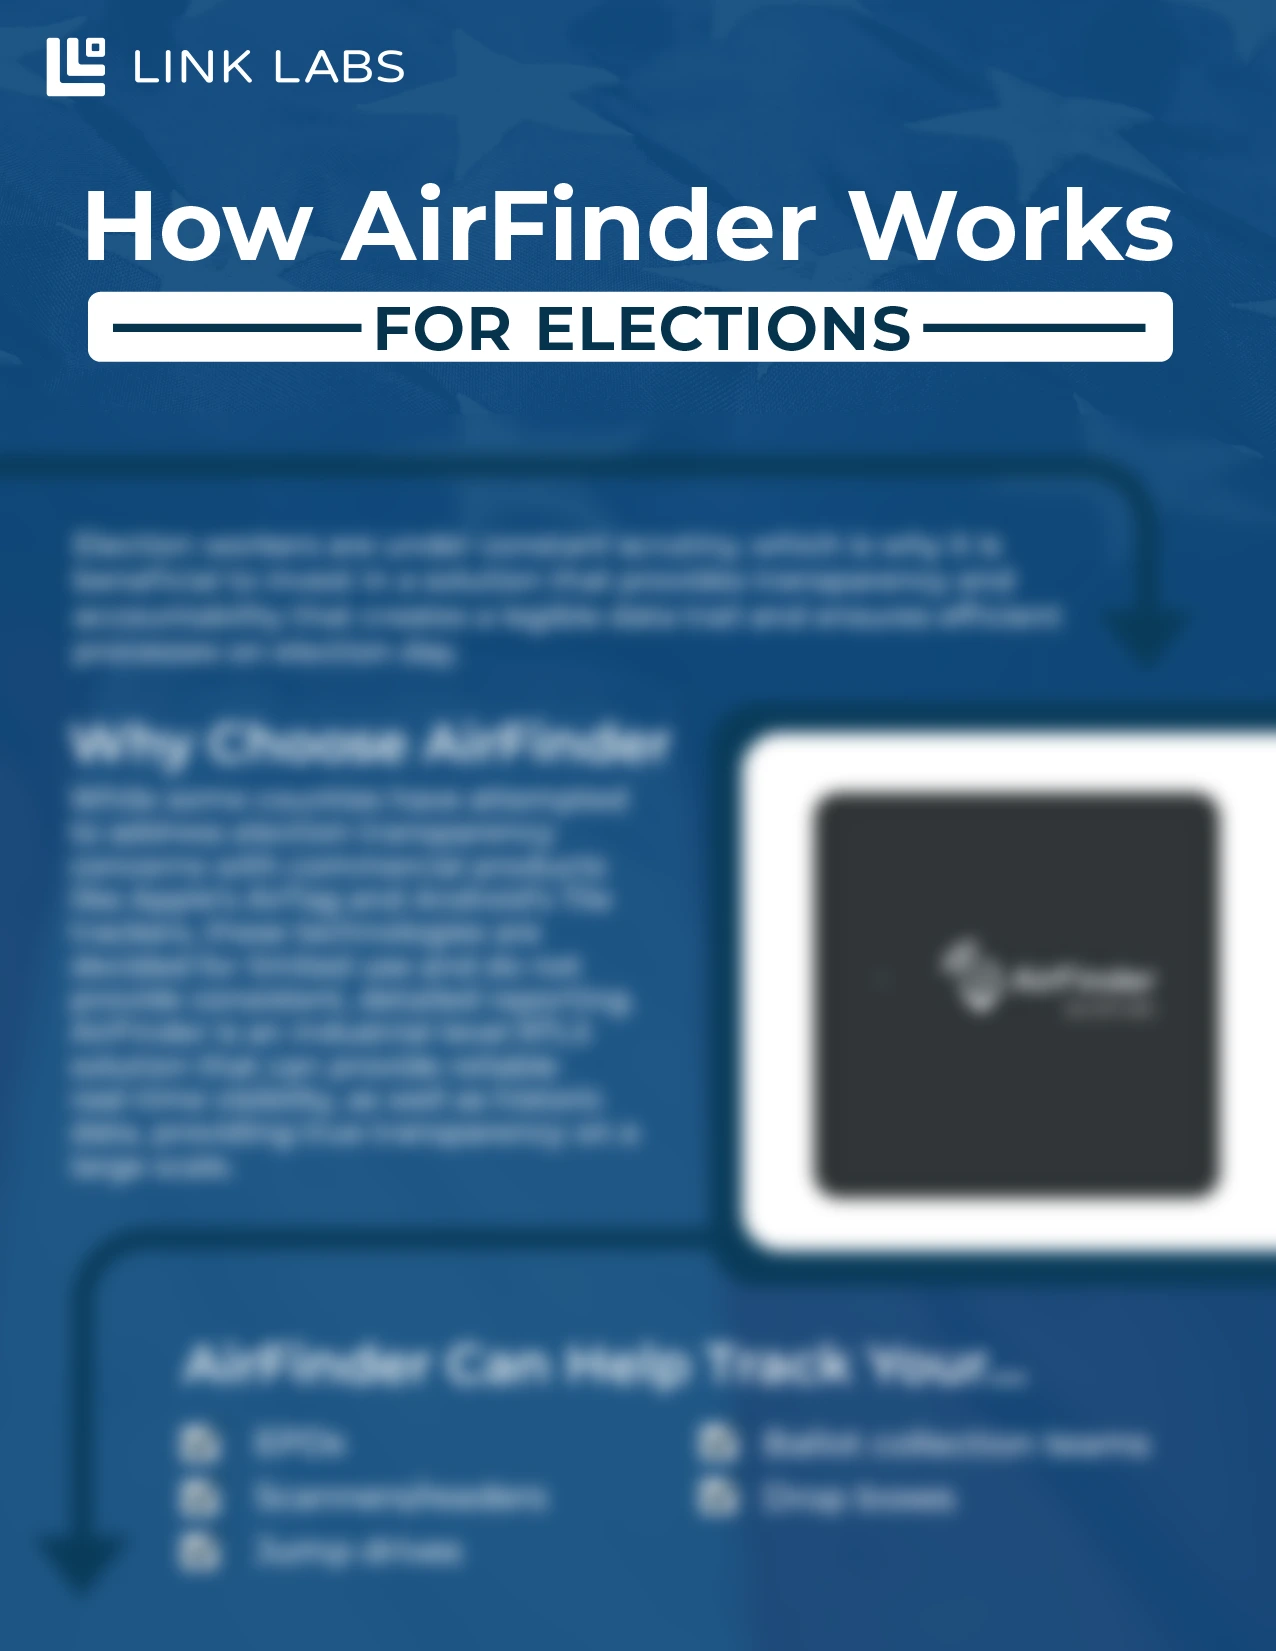 How-AirFinder-Works-for-Elections-THUMBNAIL